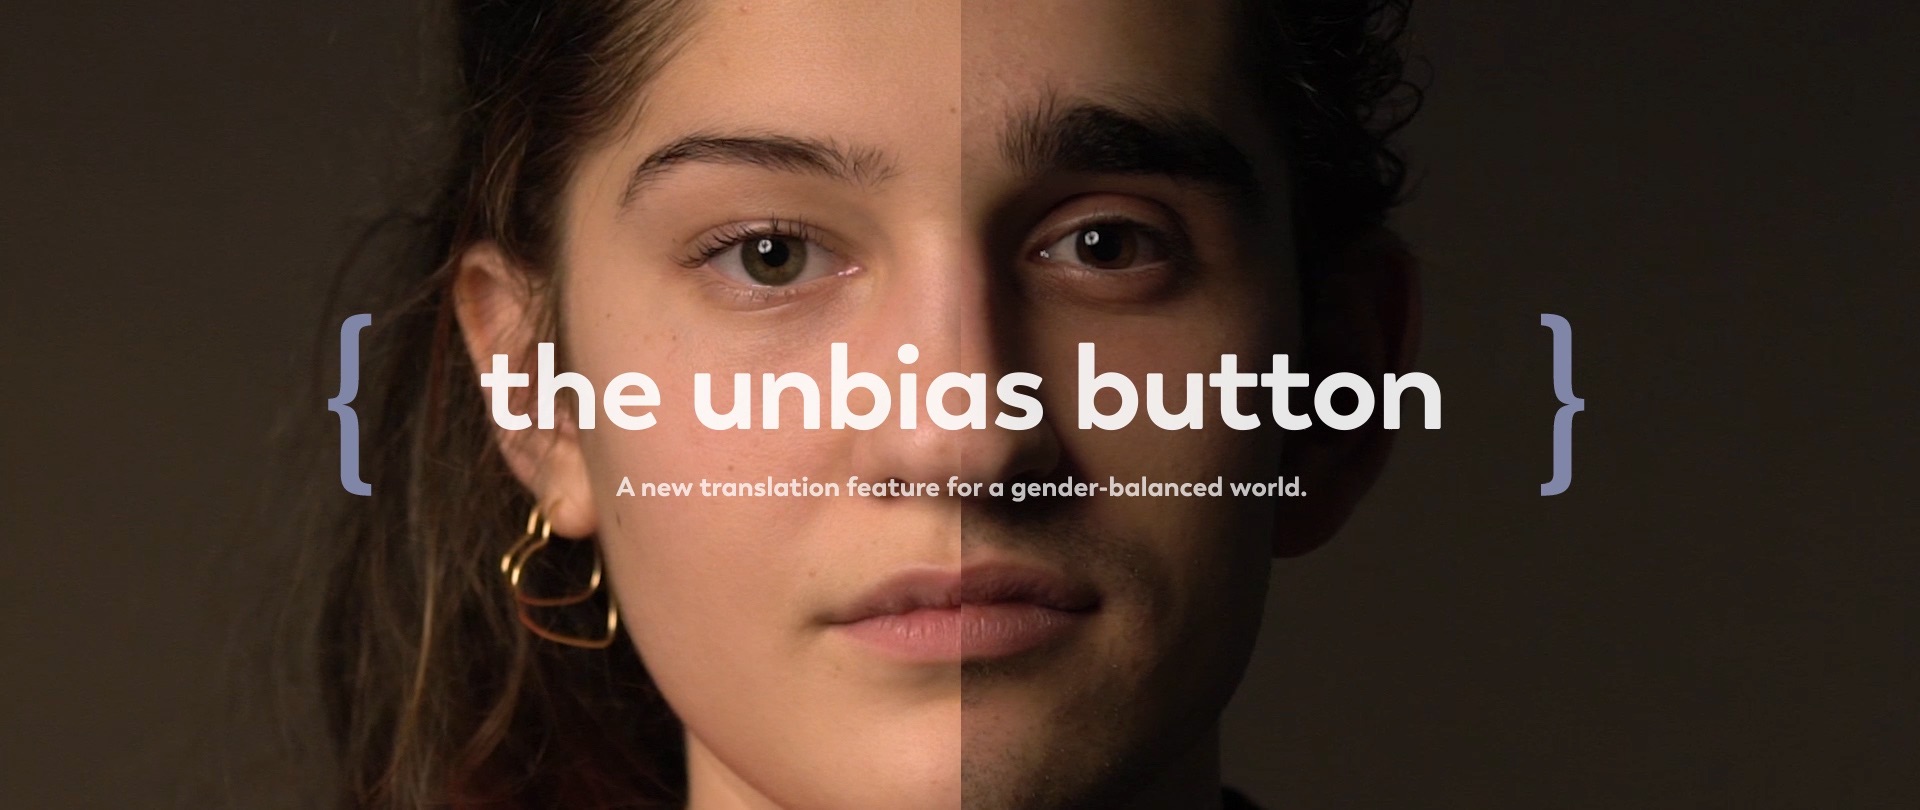 ElaN Languages: The Unbias Button - Rallying cry to the world to end gender-bias The Unbias Button Campaigns of the World®